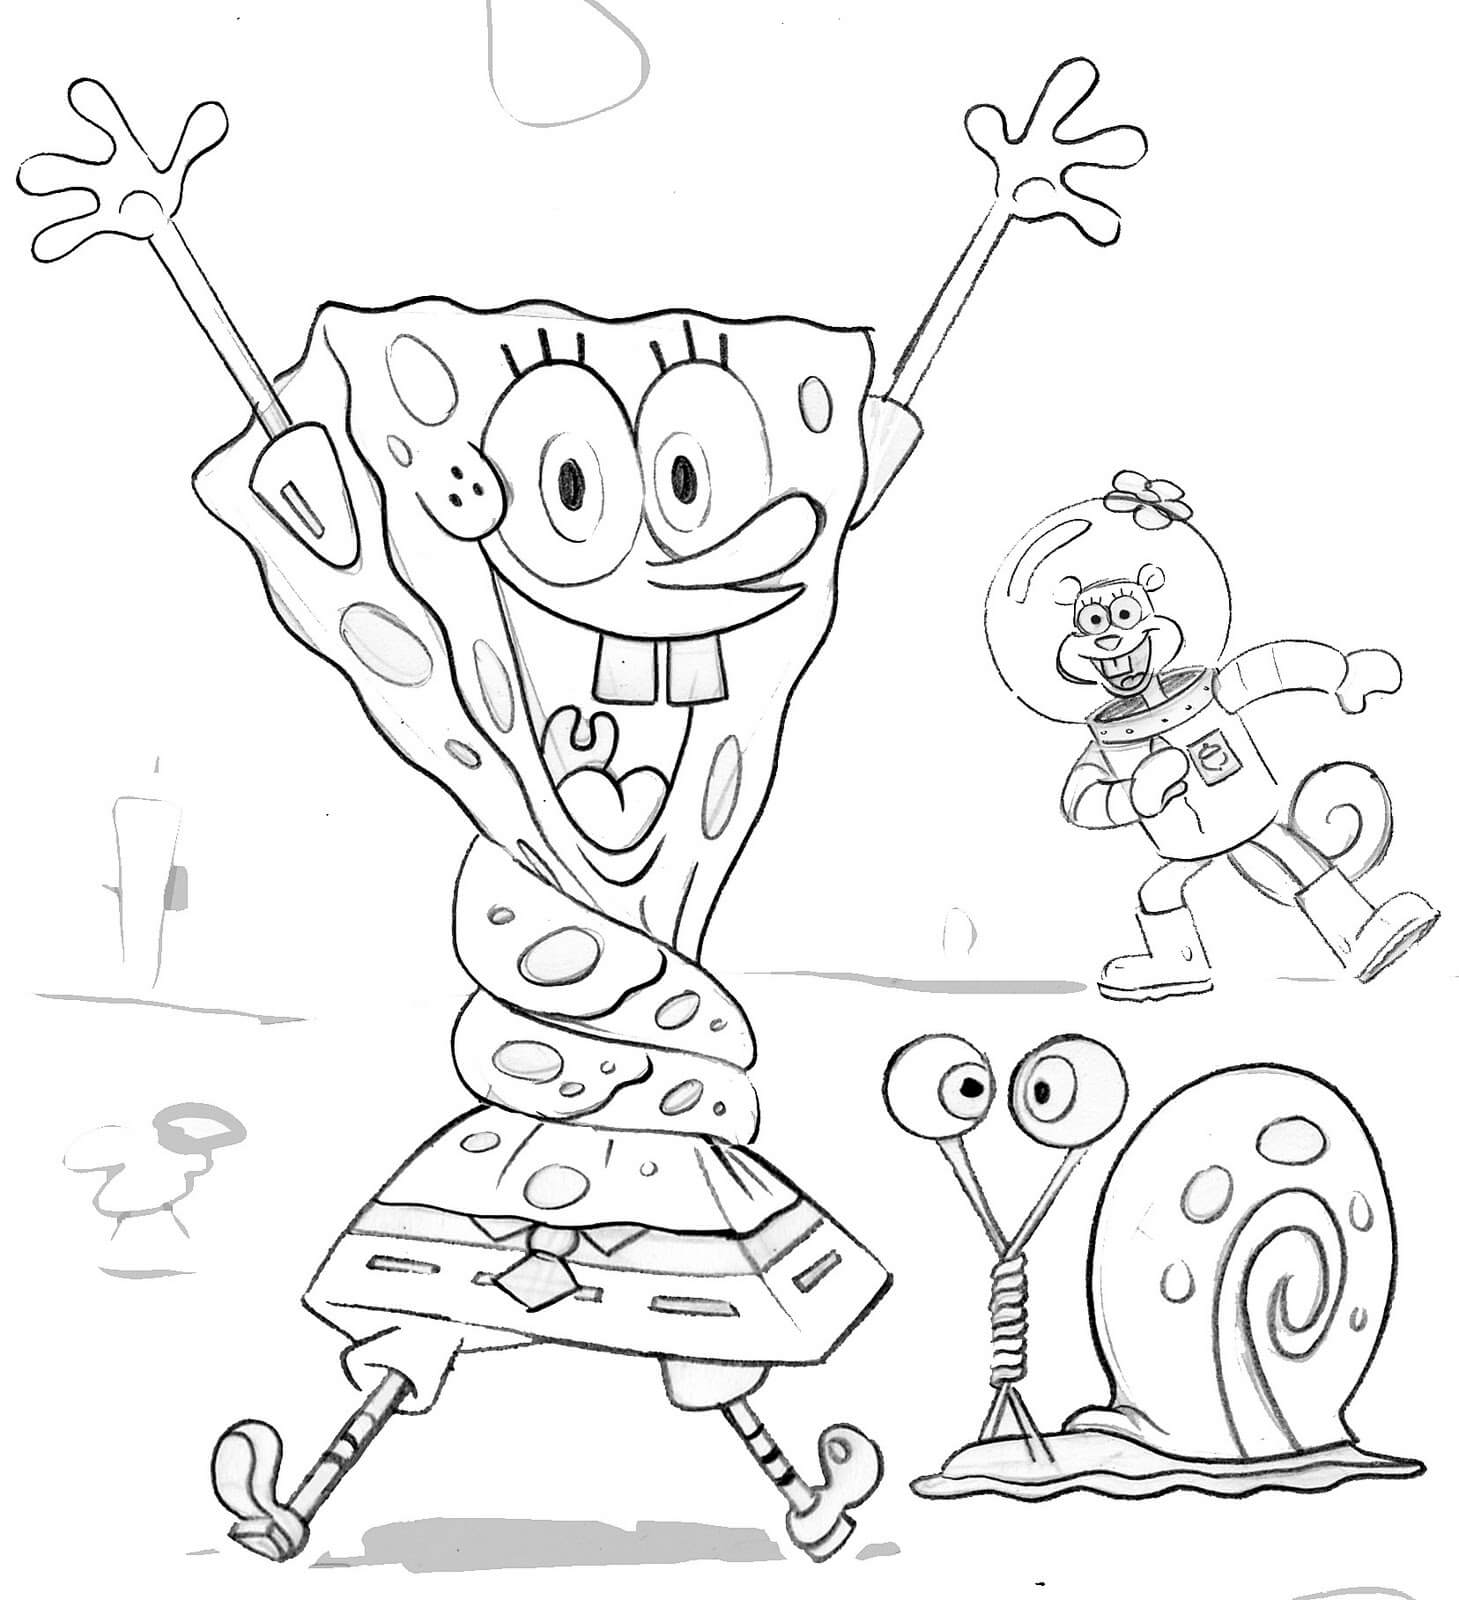 Twisted Spongebob Coloring Pages